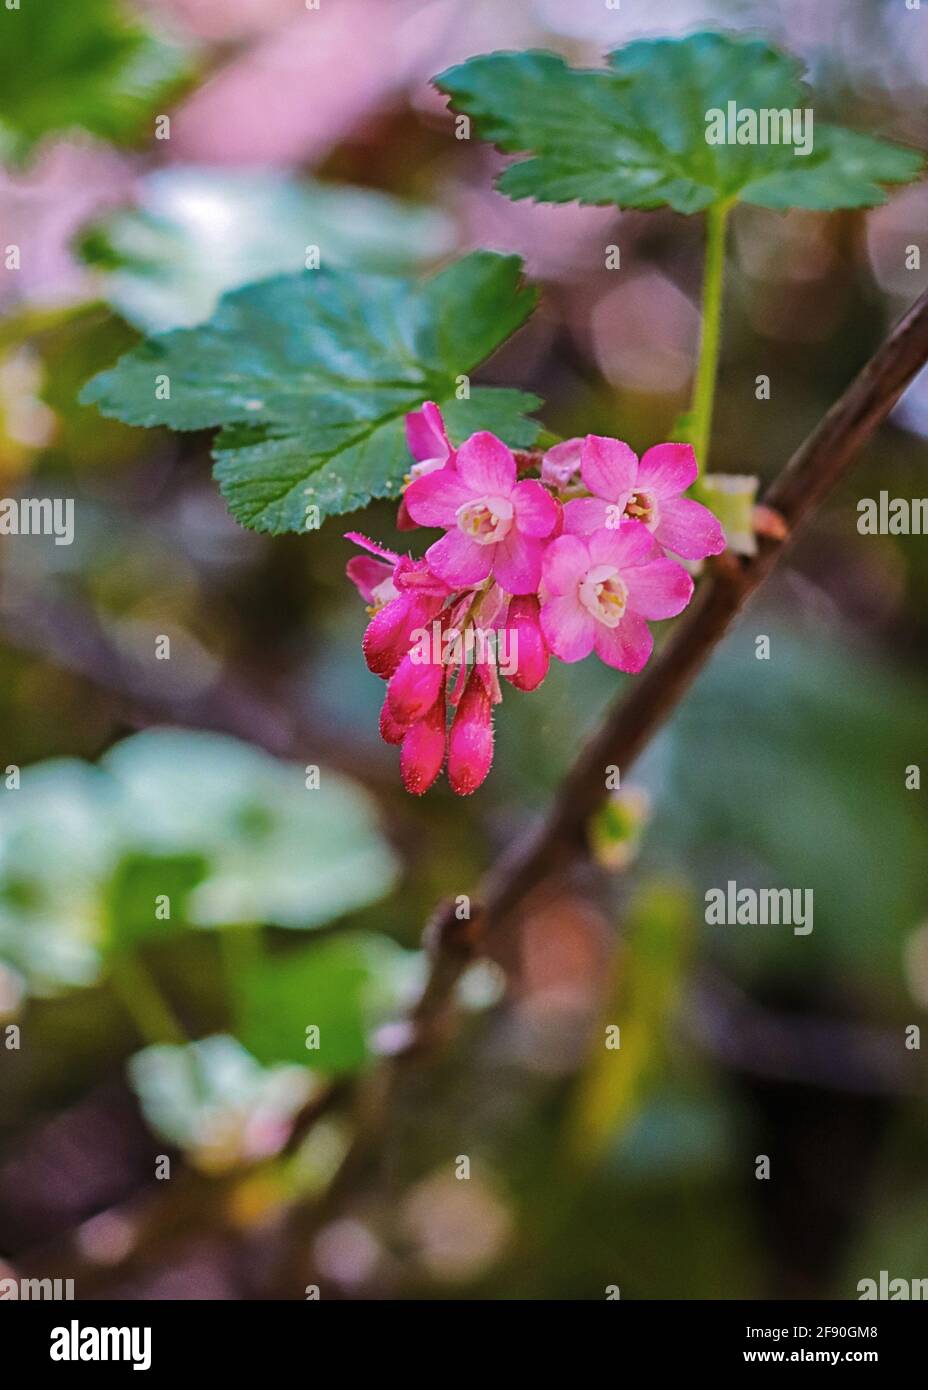 Pink wildflower growing along a forest path in the spring Stock Photo